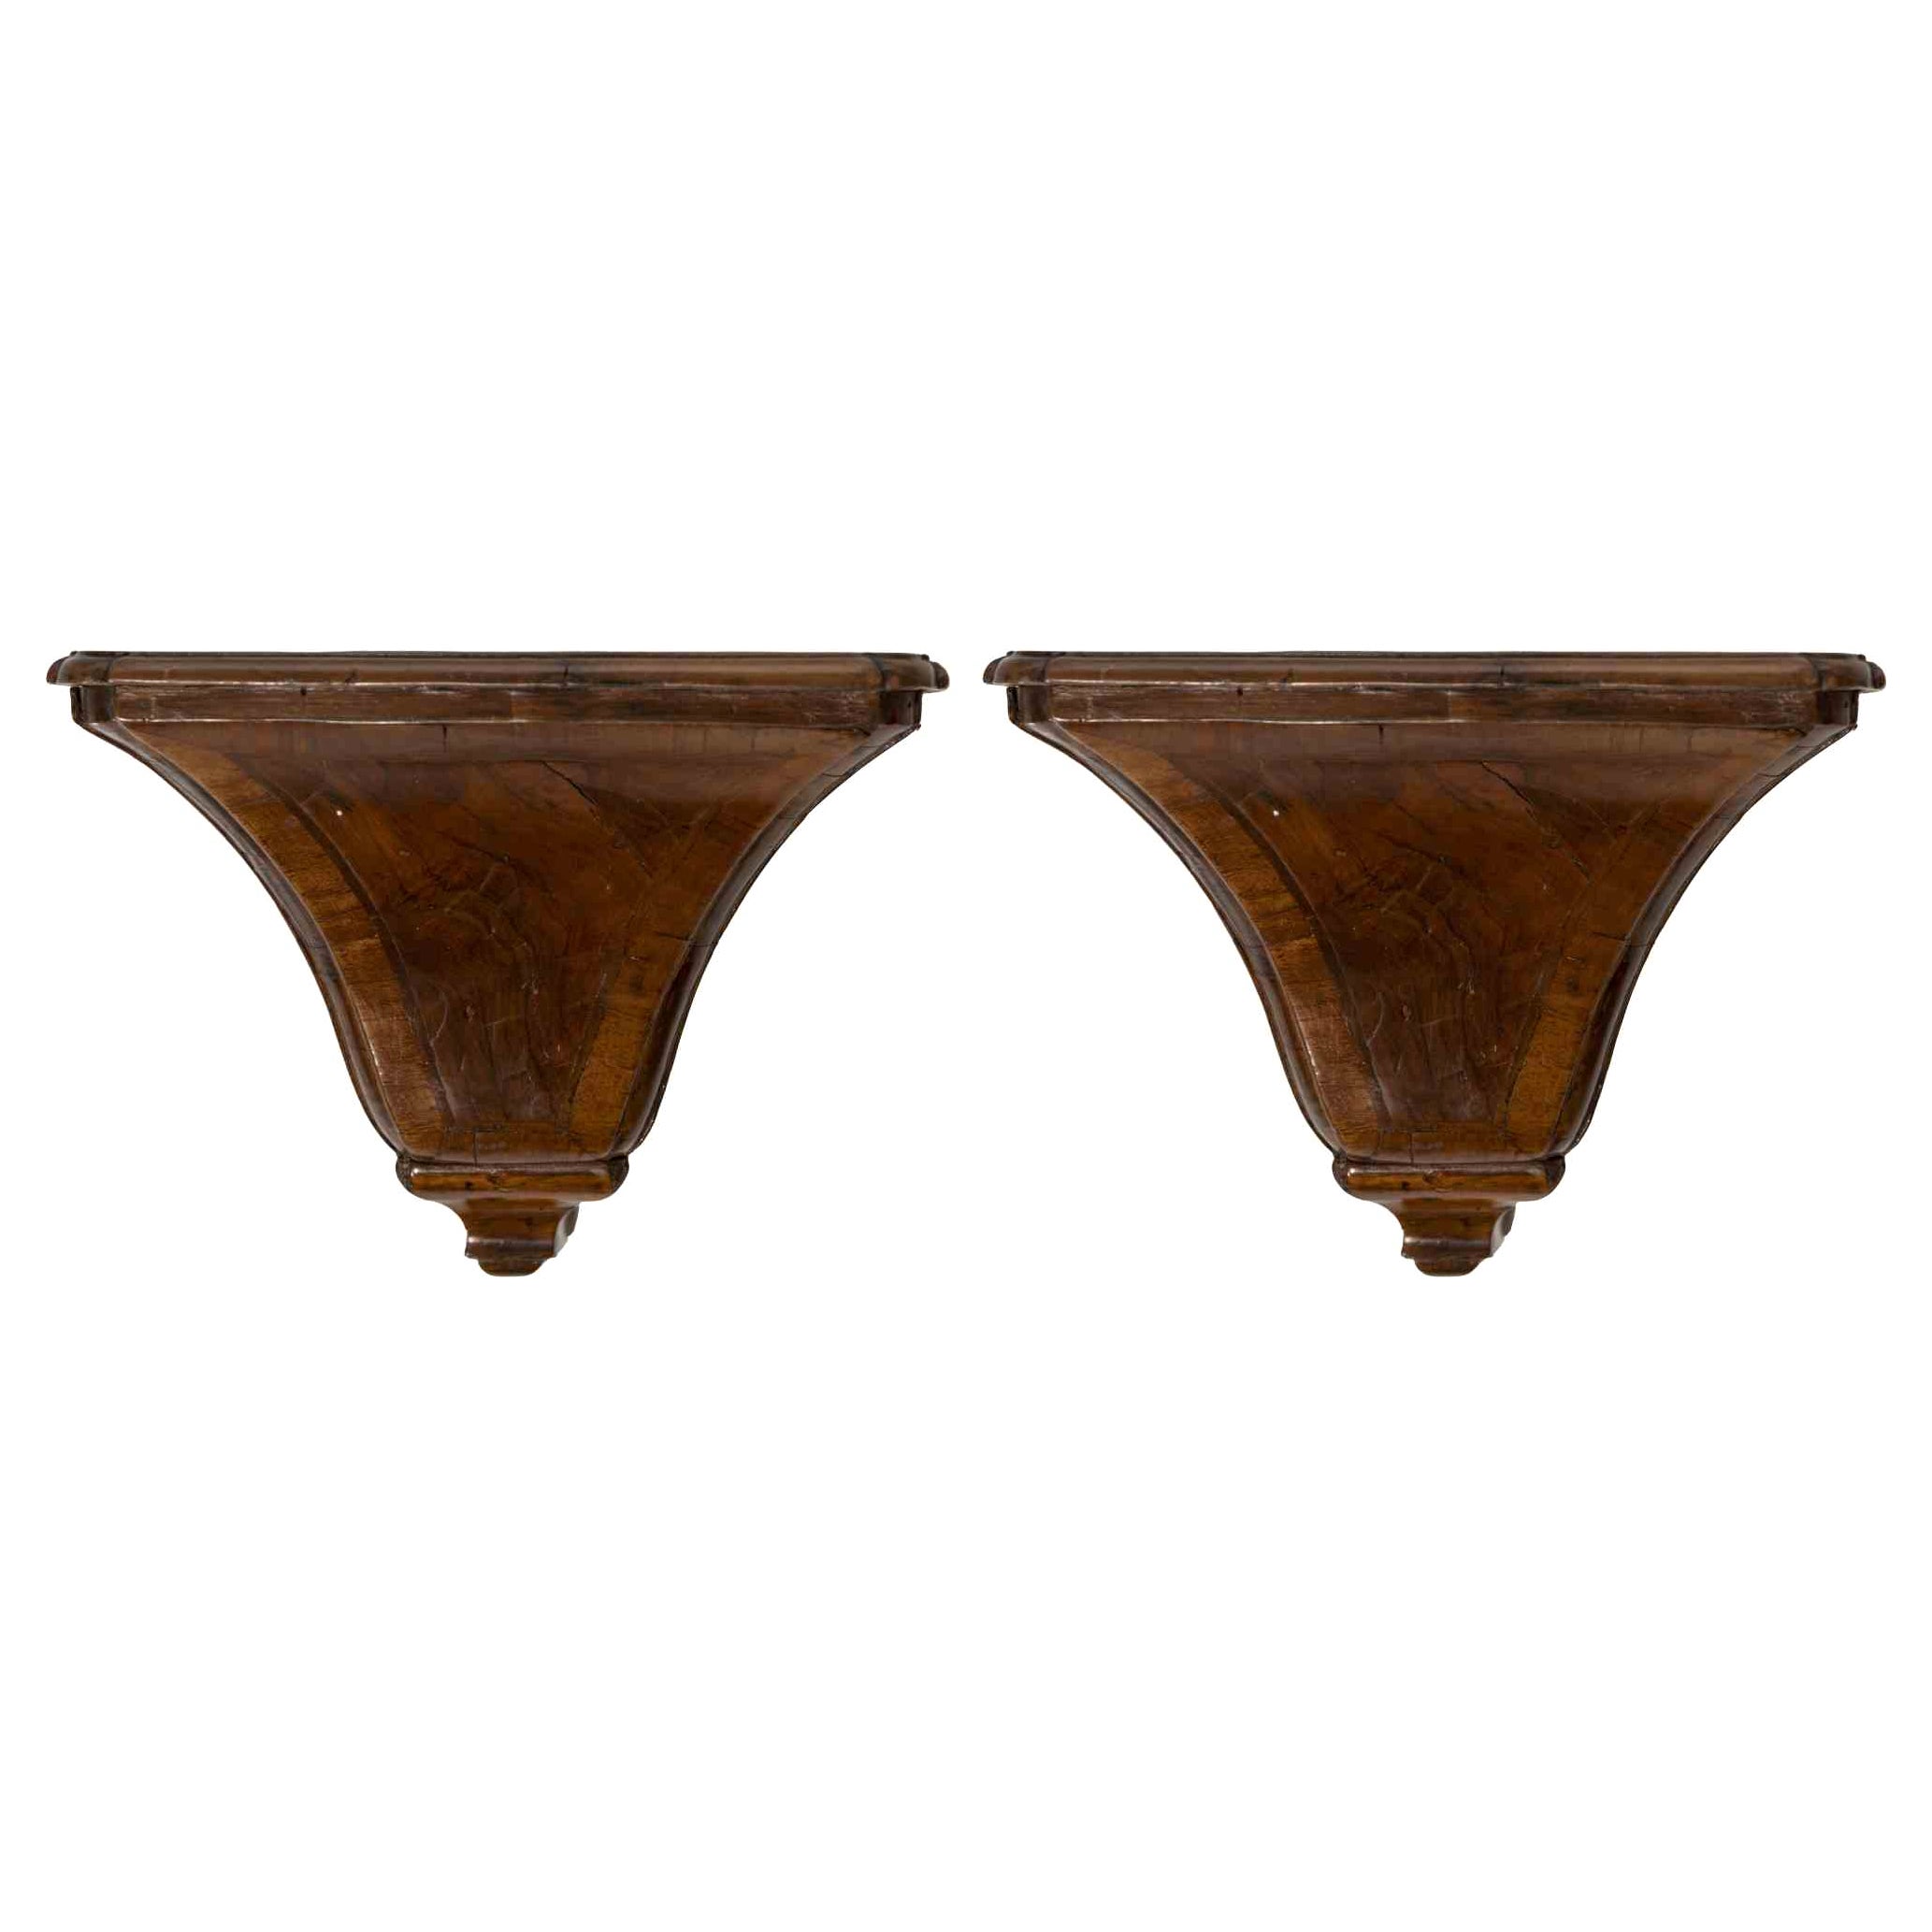 Pair of Wall Consolles in Wood, 1840